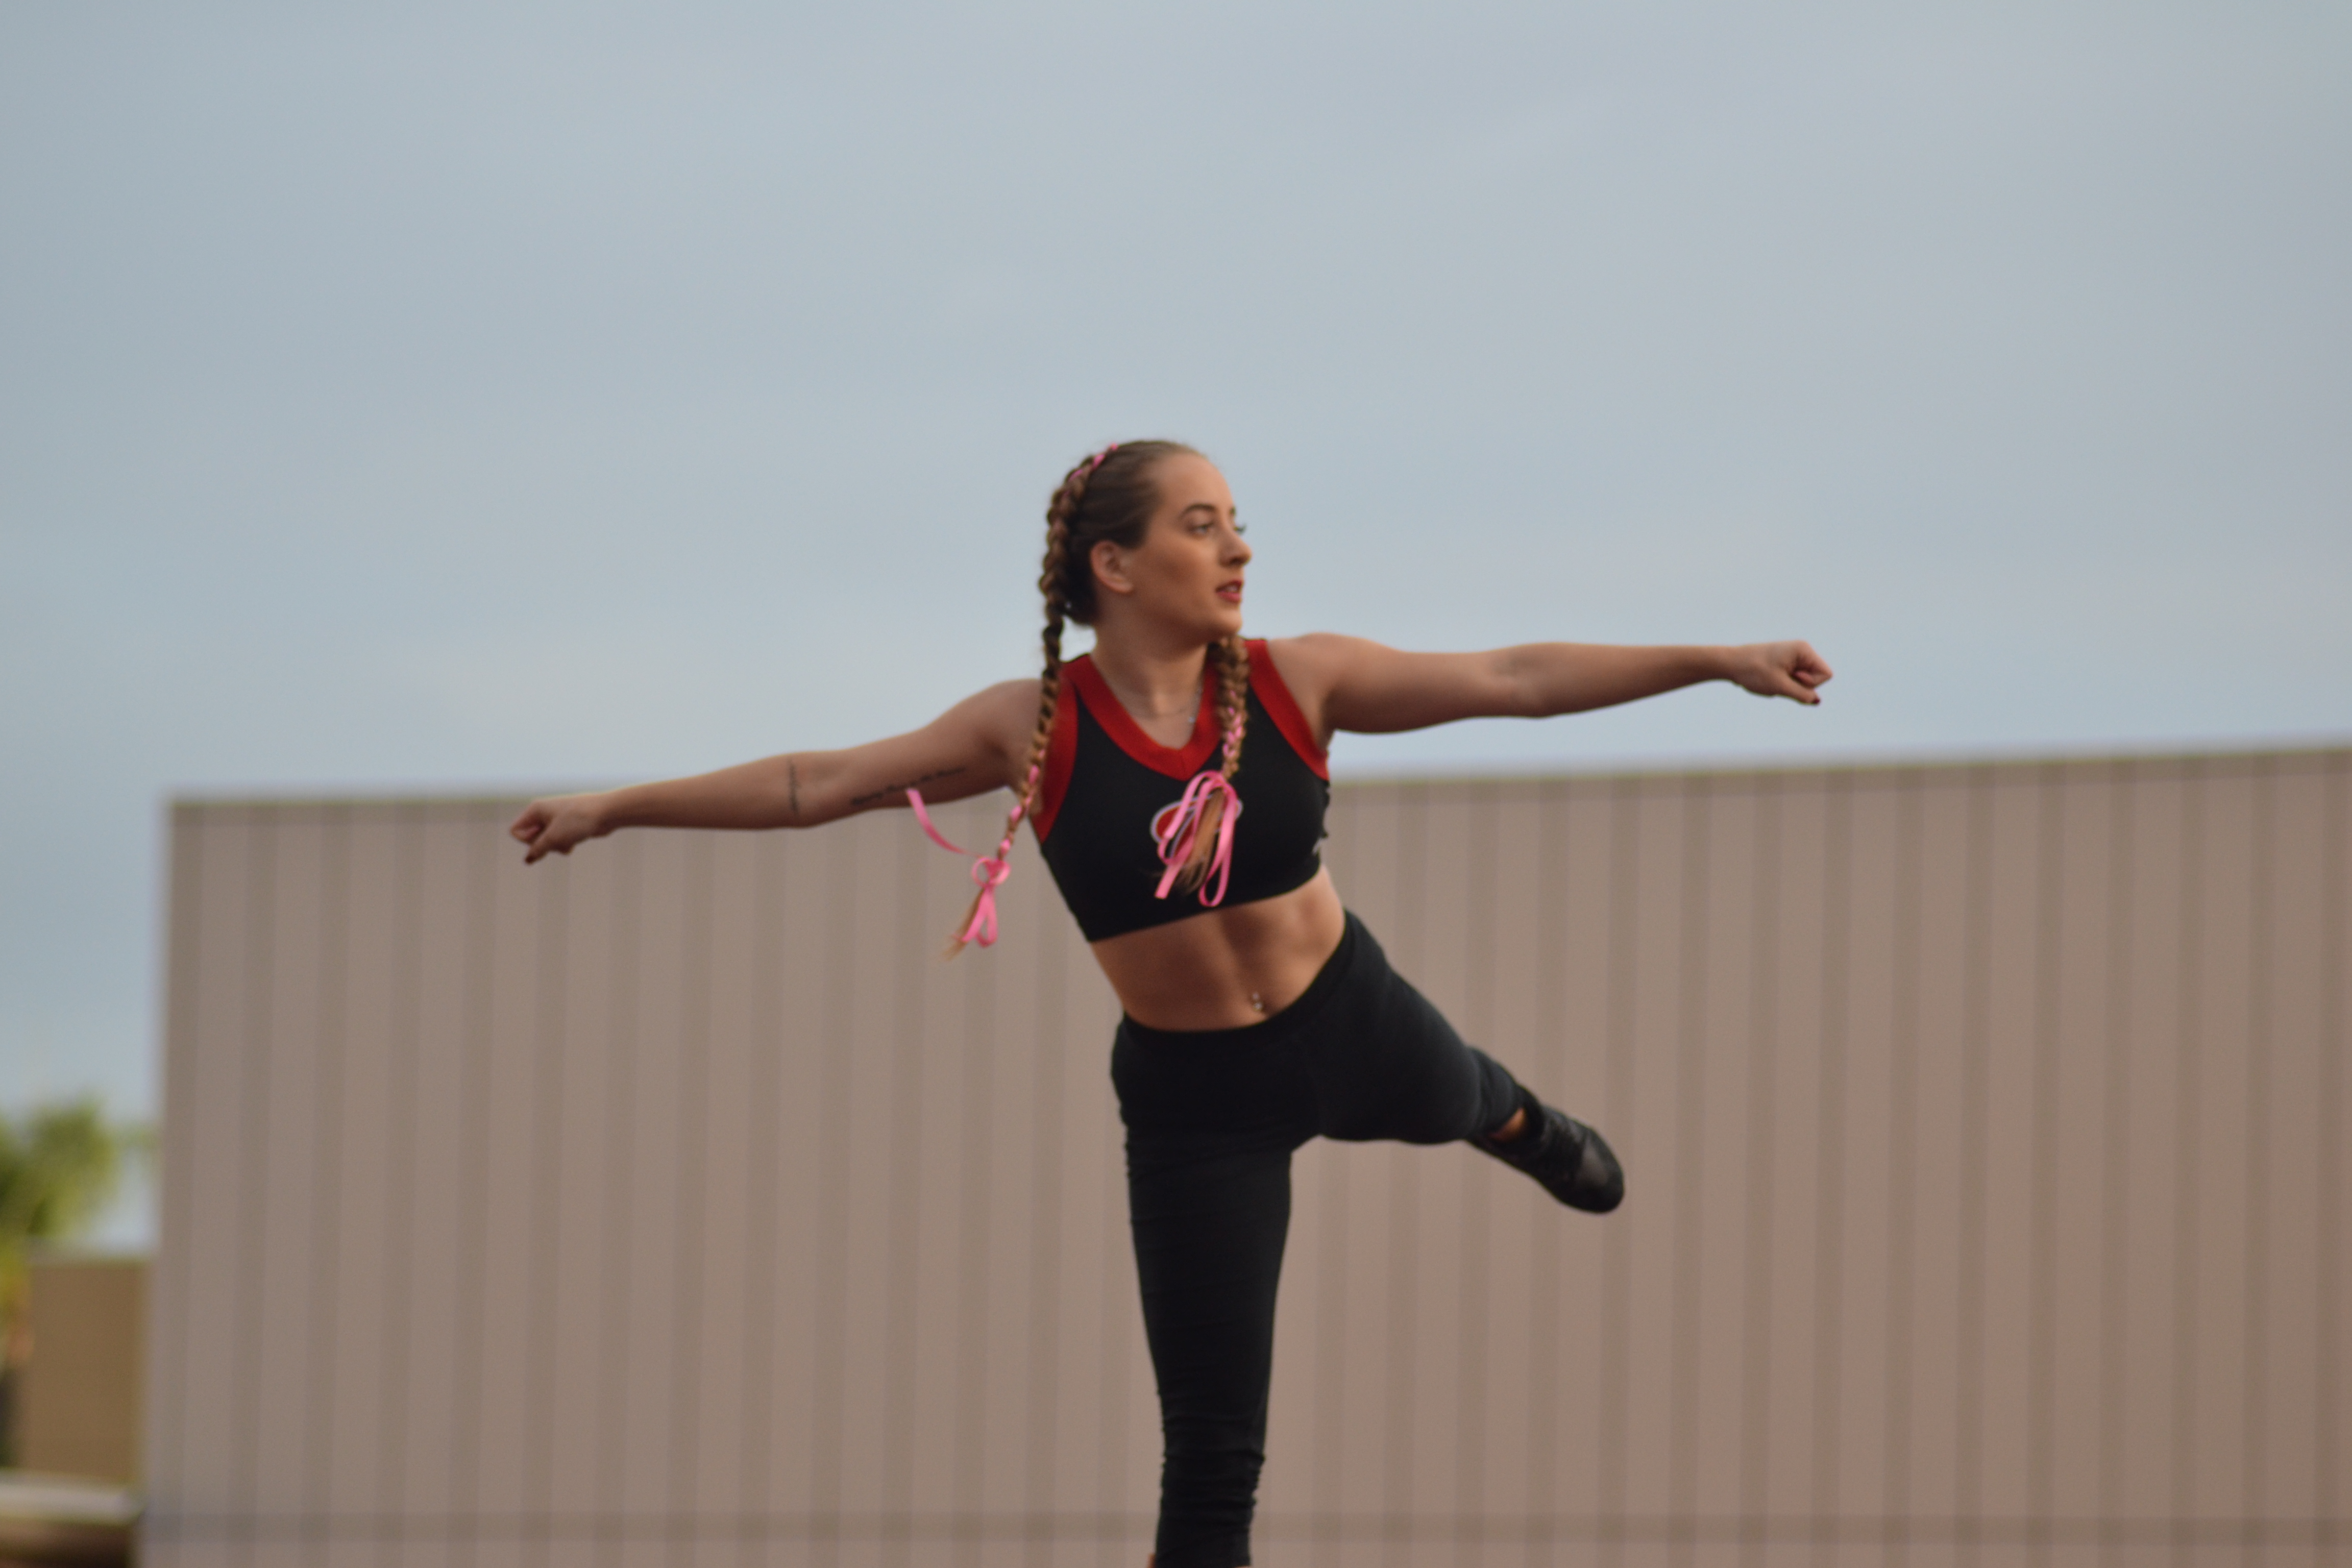 A female cheerleader in a black top and black pants and shoes stand on her right leg, stretches both arms to her sides in a fist, an extends her left leg behind her. She looks to the right.